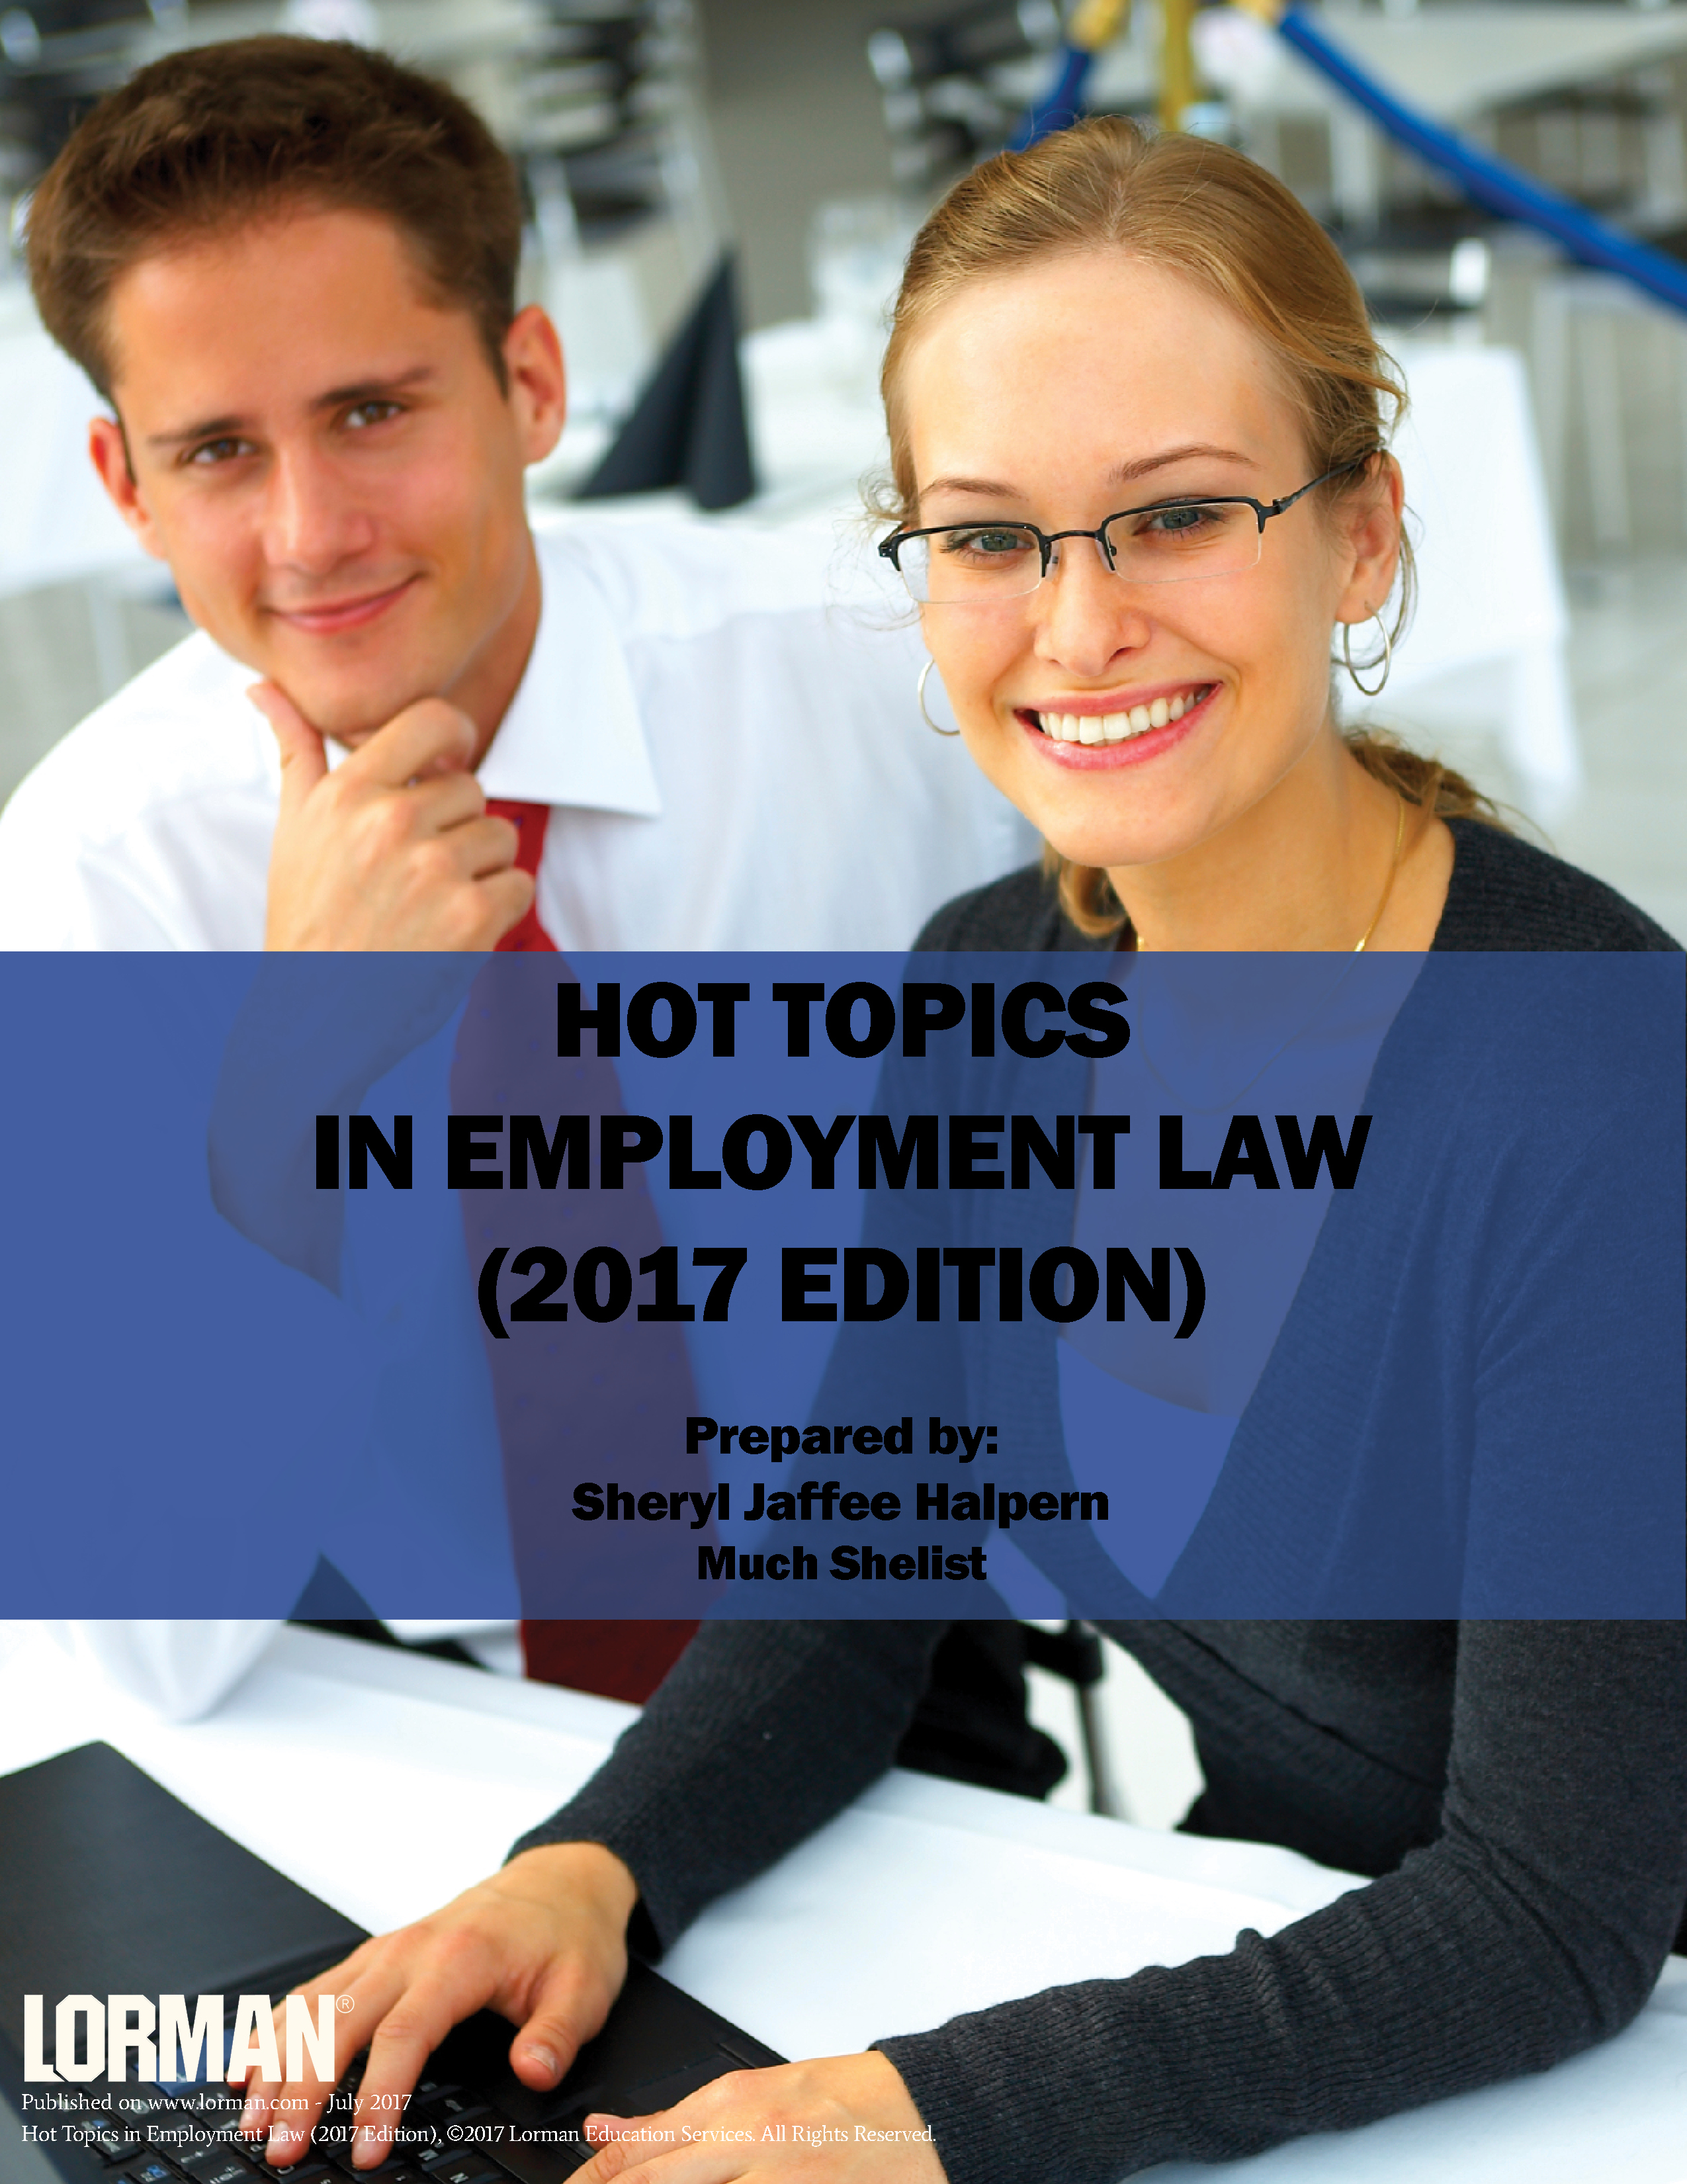 Hot Topics in Employment Law (2017 Edition)